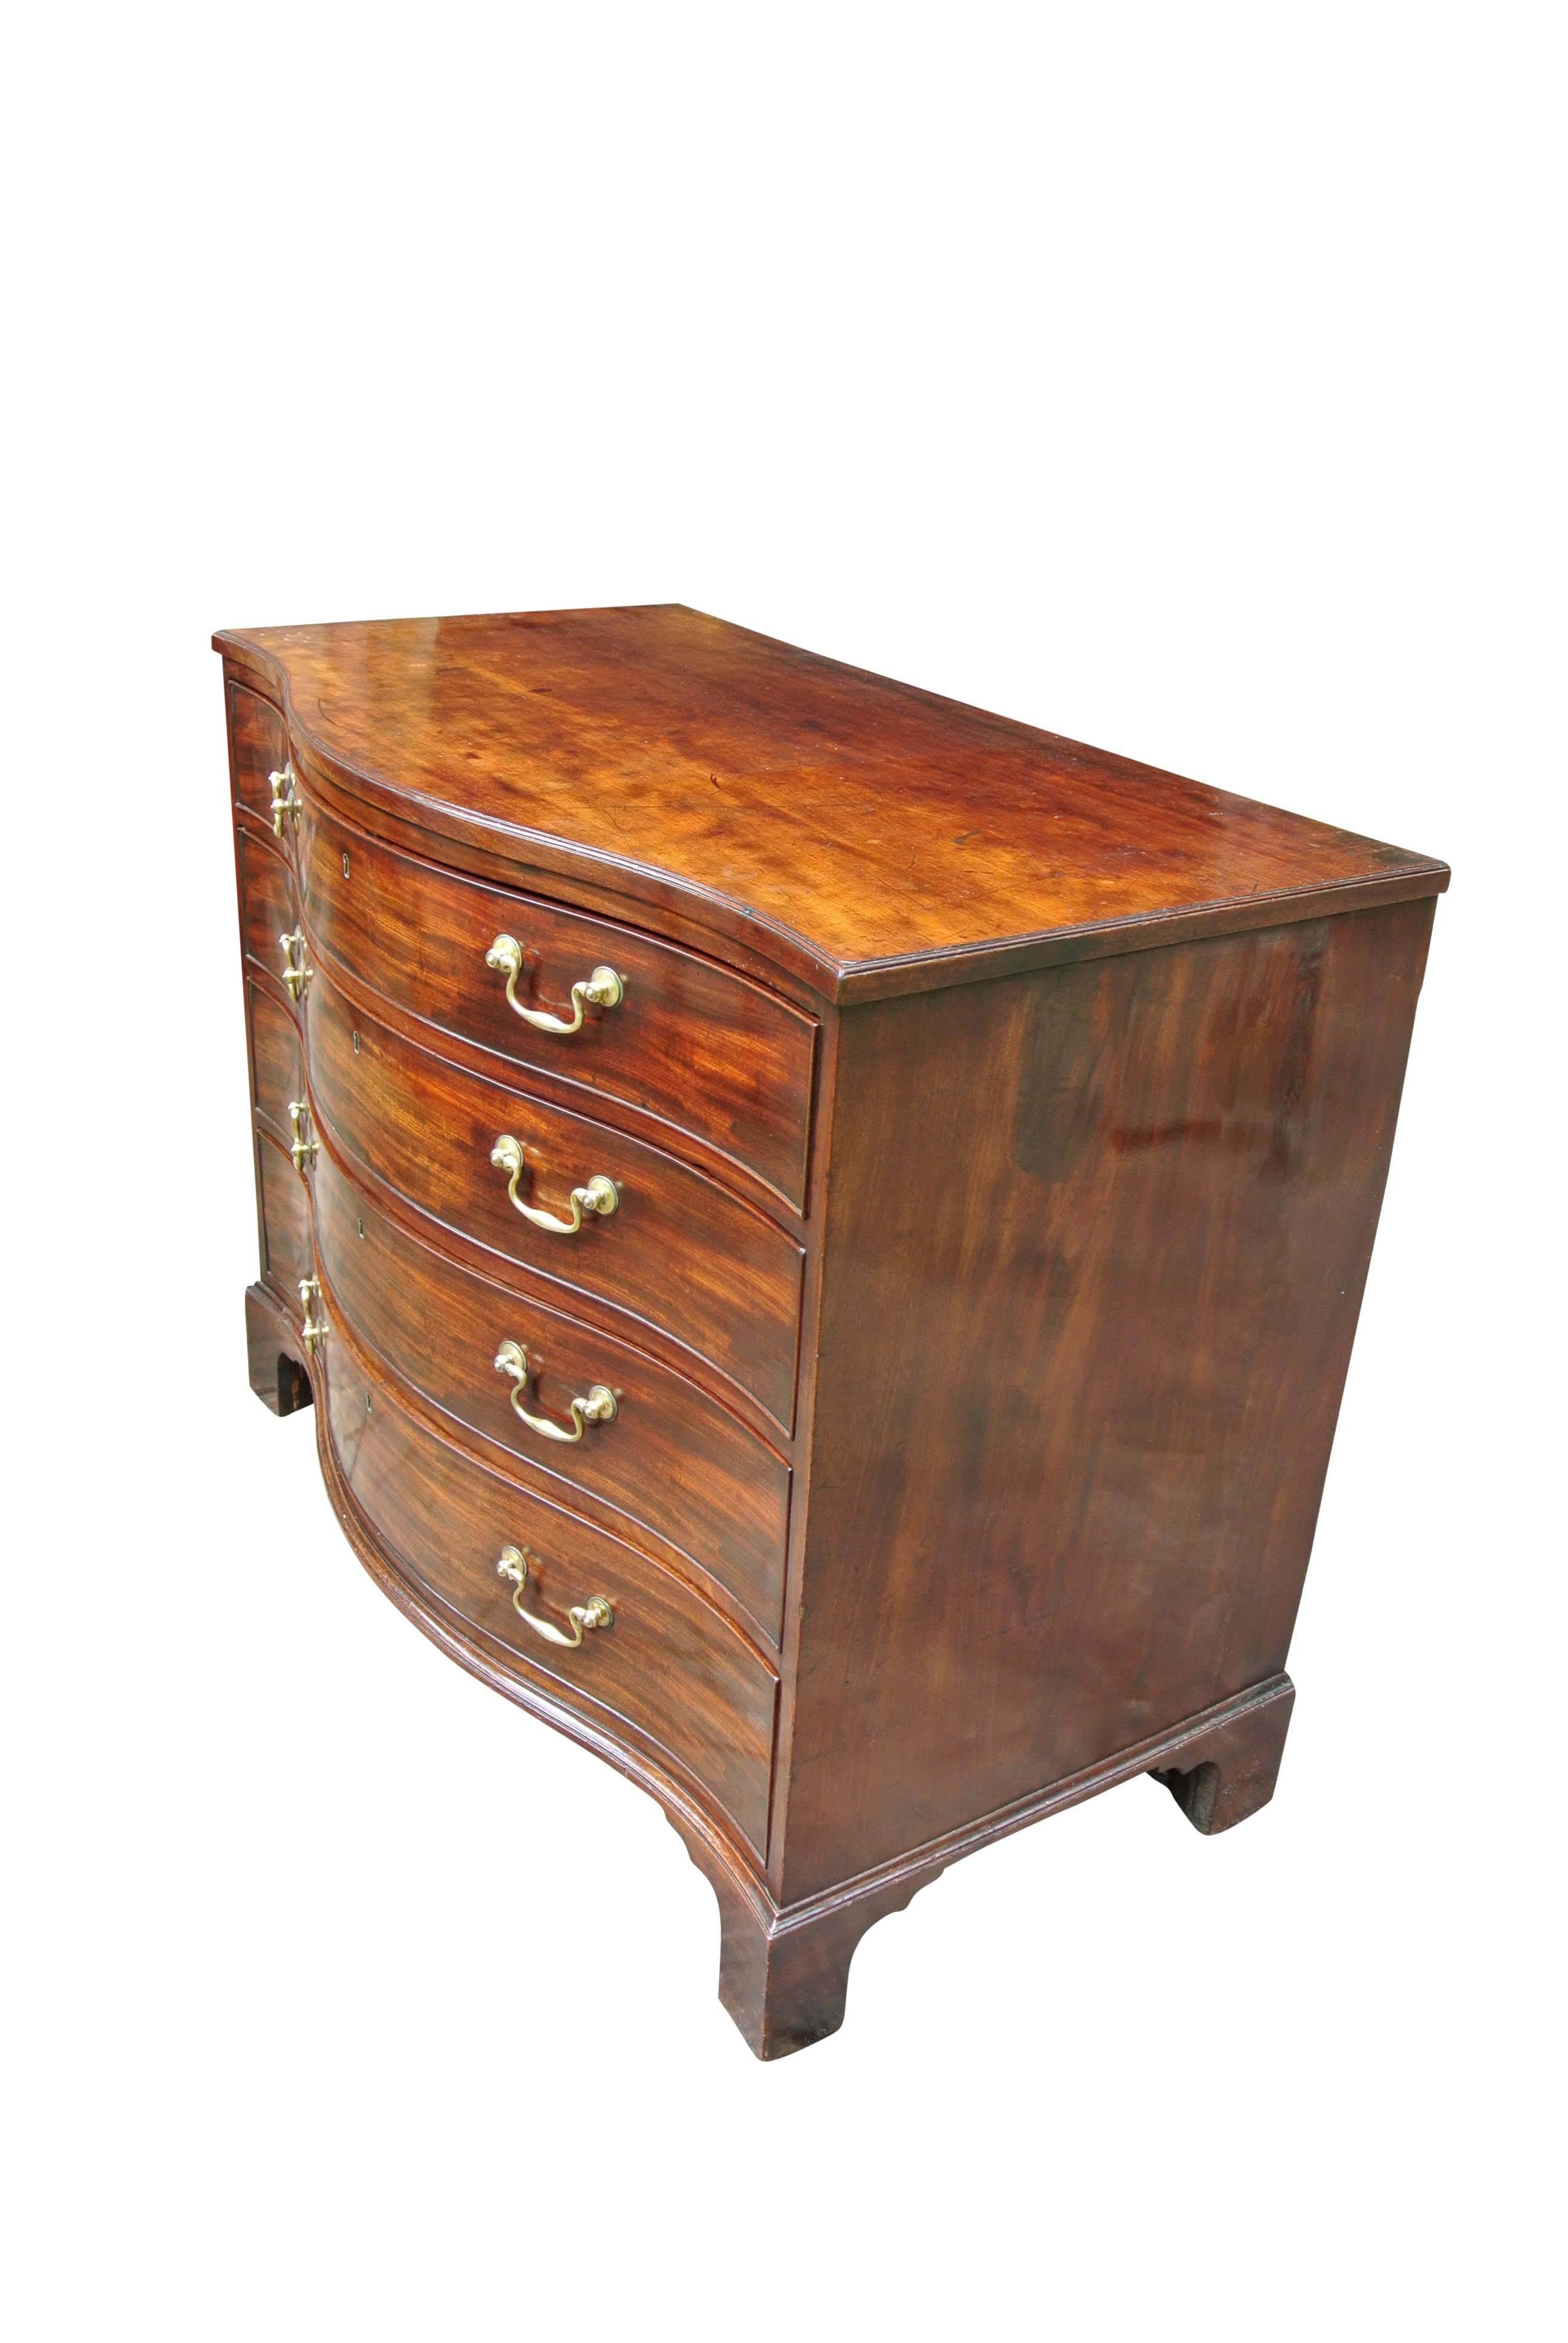 An extremely handsome, very good quality George 3rd mahogany chest of drawers in original condition. The handles and patina are original as are the brass locks. The drawers are oak lined and faced with well figured veneers, as are the sides.